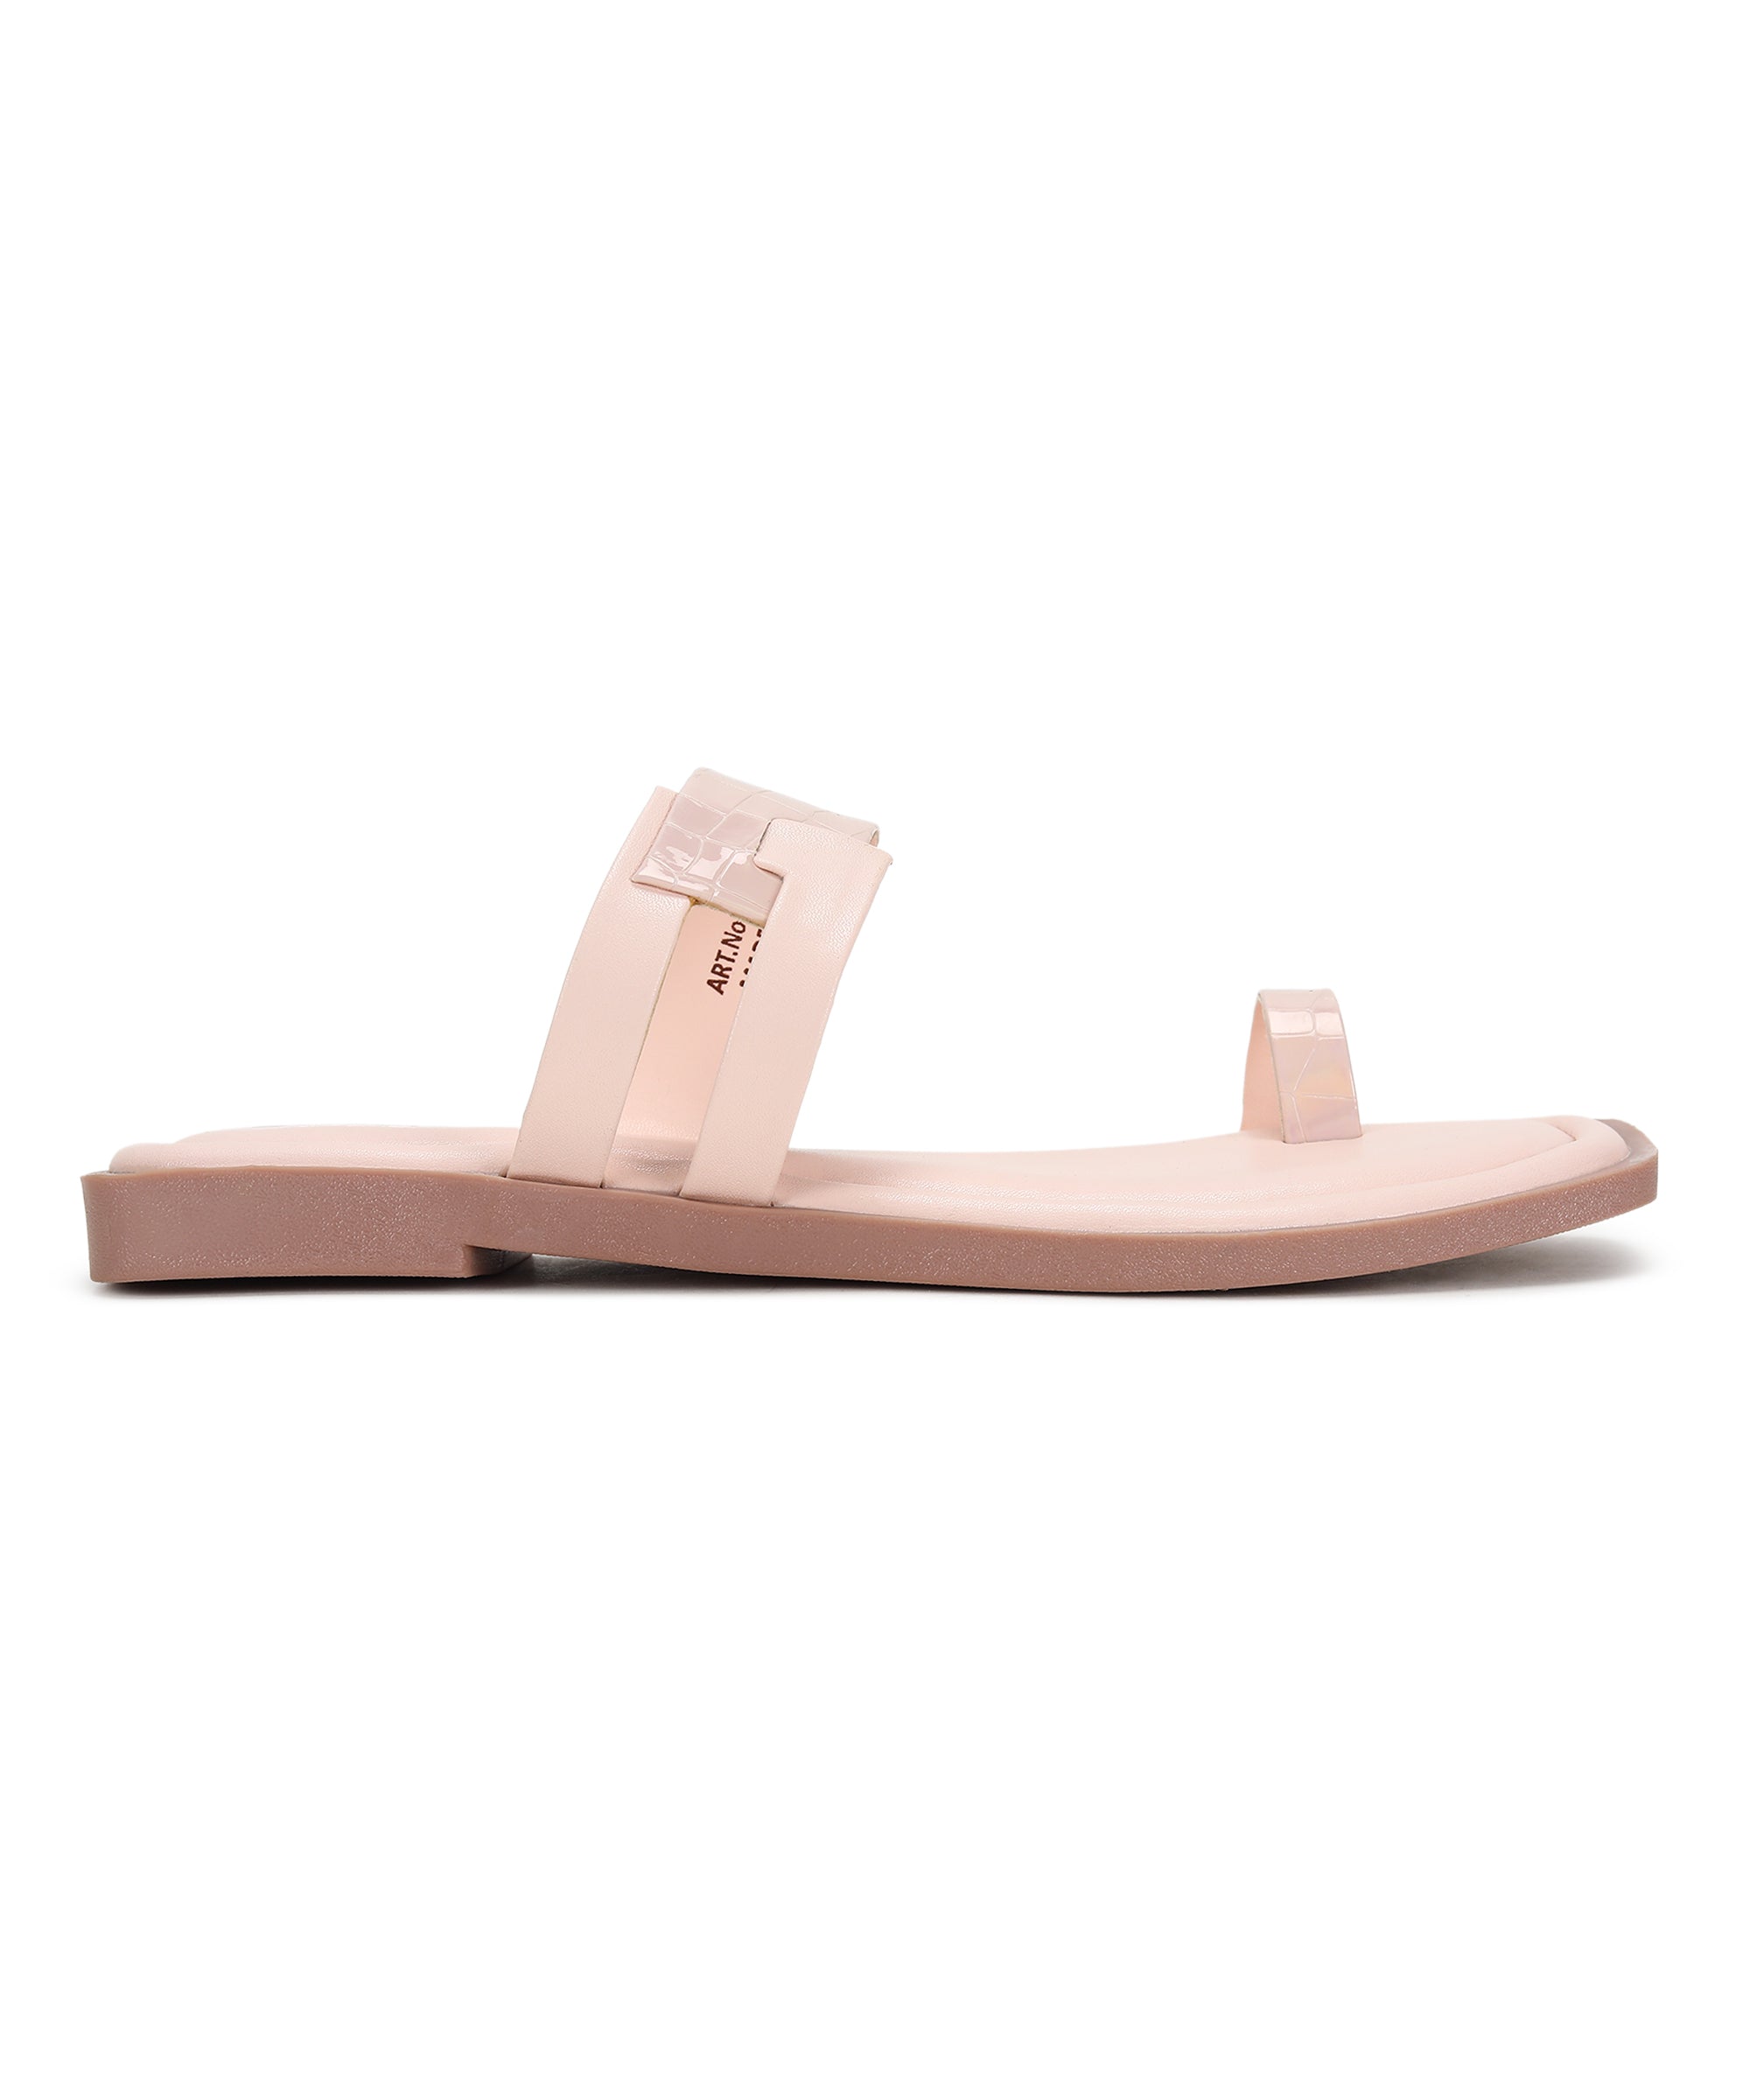 Paragon RK6025L Women Sandals | Casual &amp; Formal Sandals | Stylish, Comfortable &amp; Durable | For Daily &amp; Occasion Wear